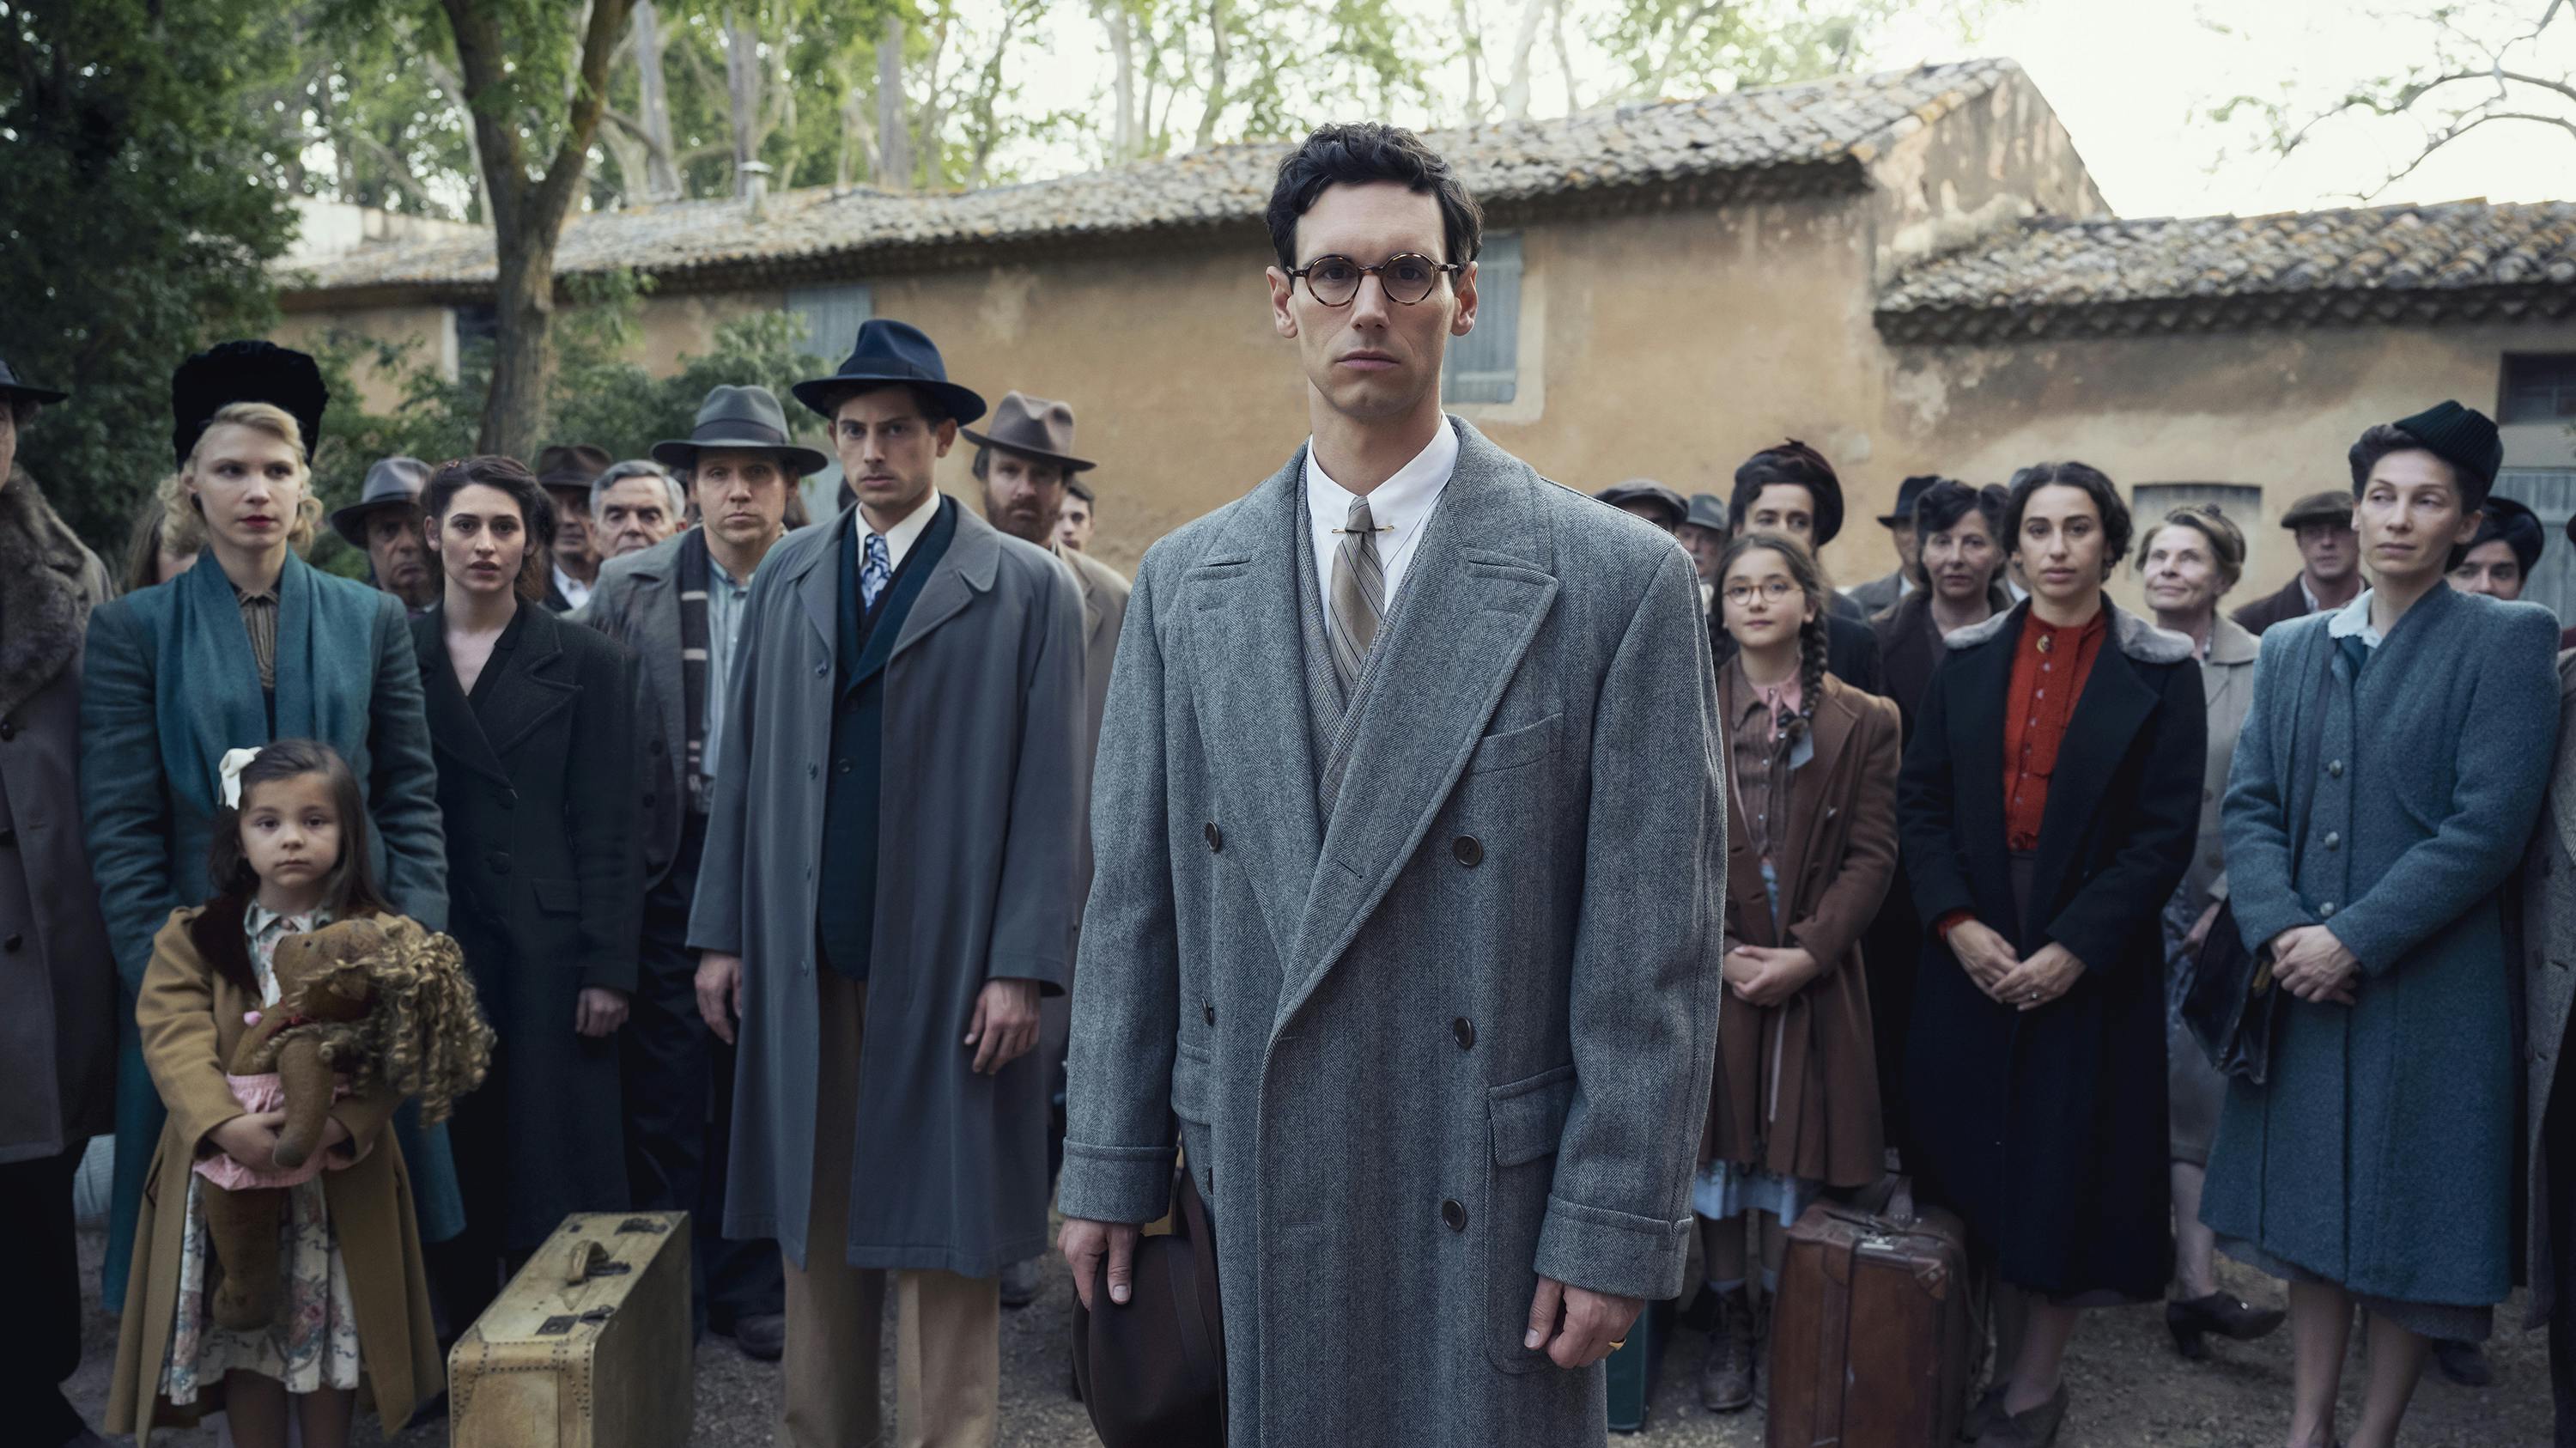 Varian Fry (Cory Michael Smith) and Thomas Lovegrove (Amit Rahav) and other cast members stand in a line facing the camera wearing a range of blue, grey, and black coats.